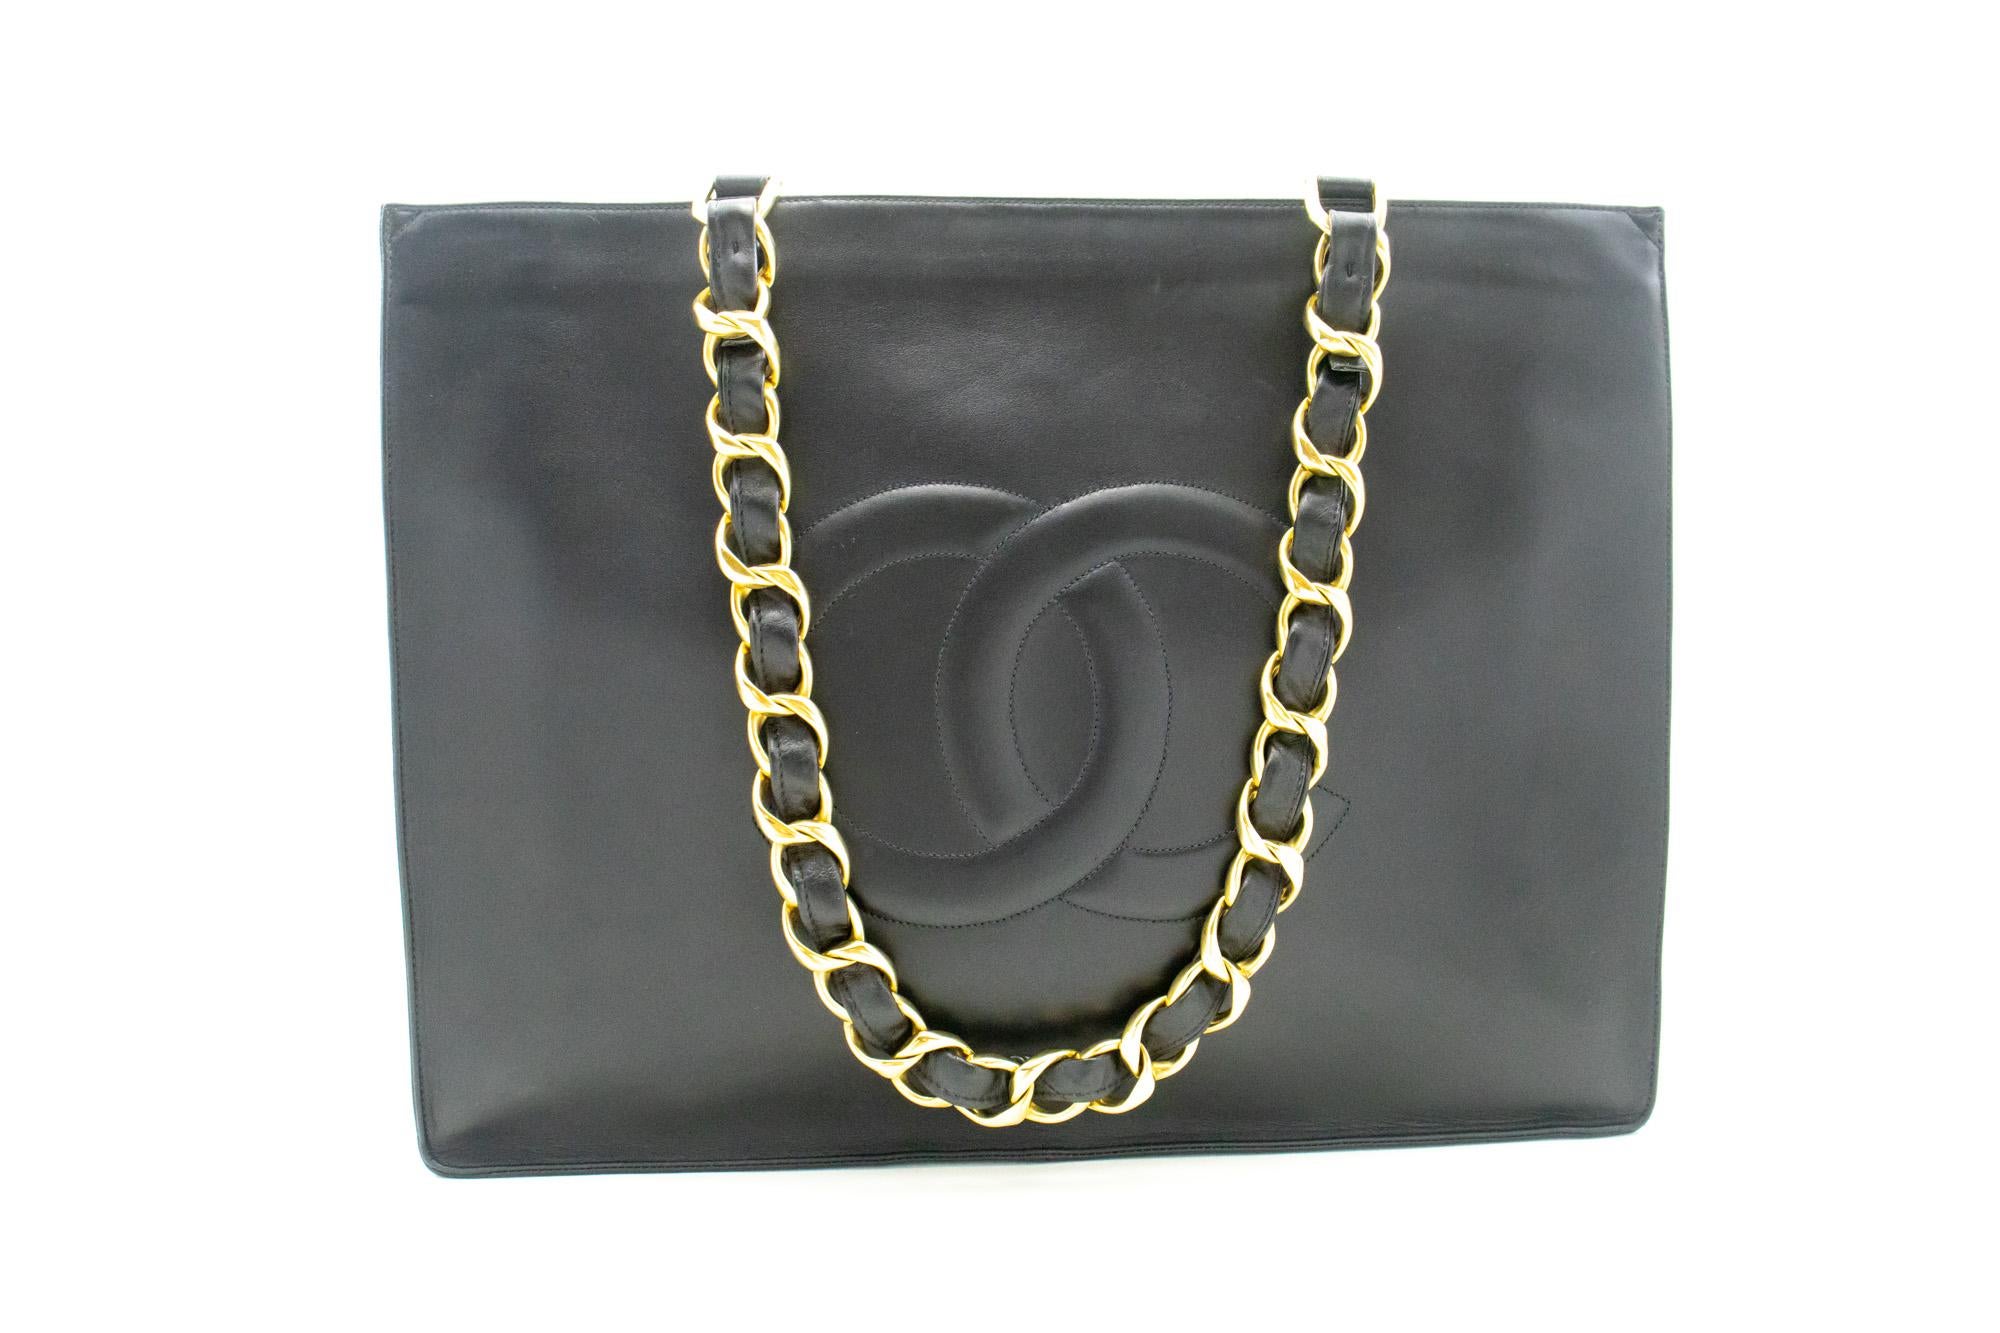 An authentic CHANEL Jumbo Large Big Chain Shoulder Bag Black made of black Lambskin Leather. The color is Black. The outside material is Leather. The pattern is Solid. This item is Vintage / Classic. The year of manufacture would be